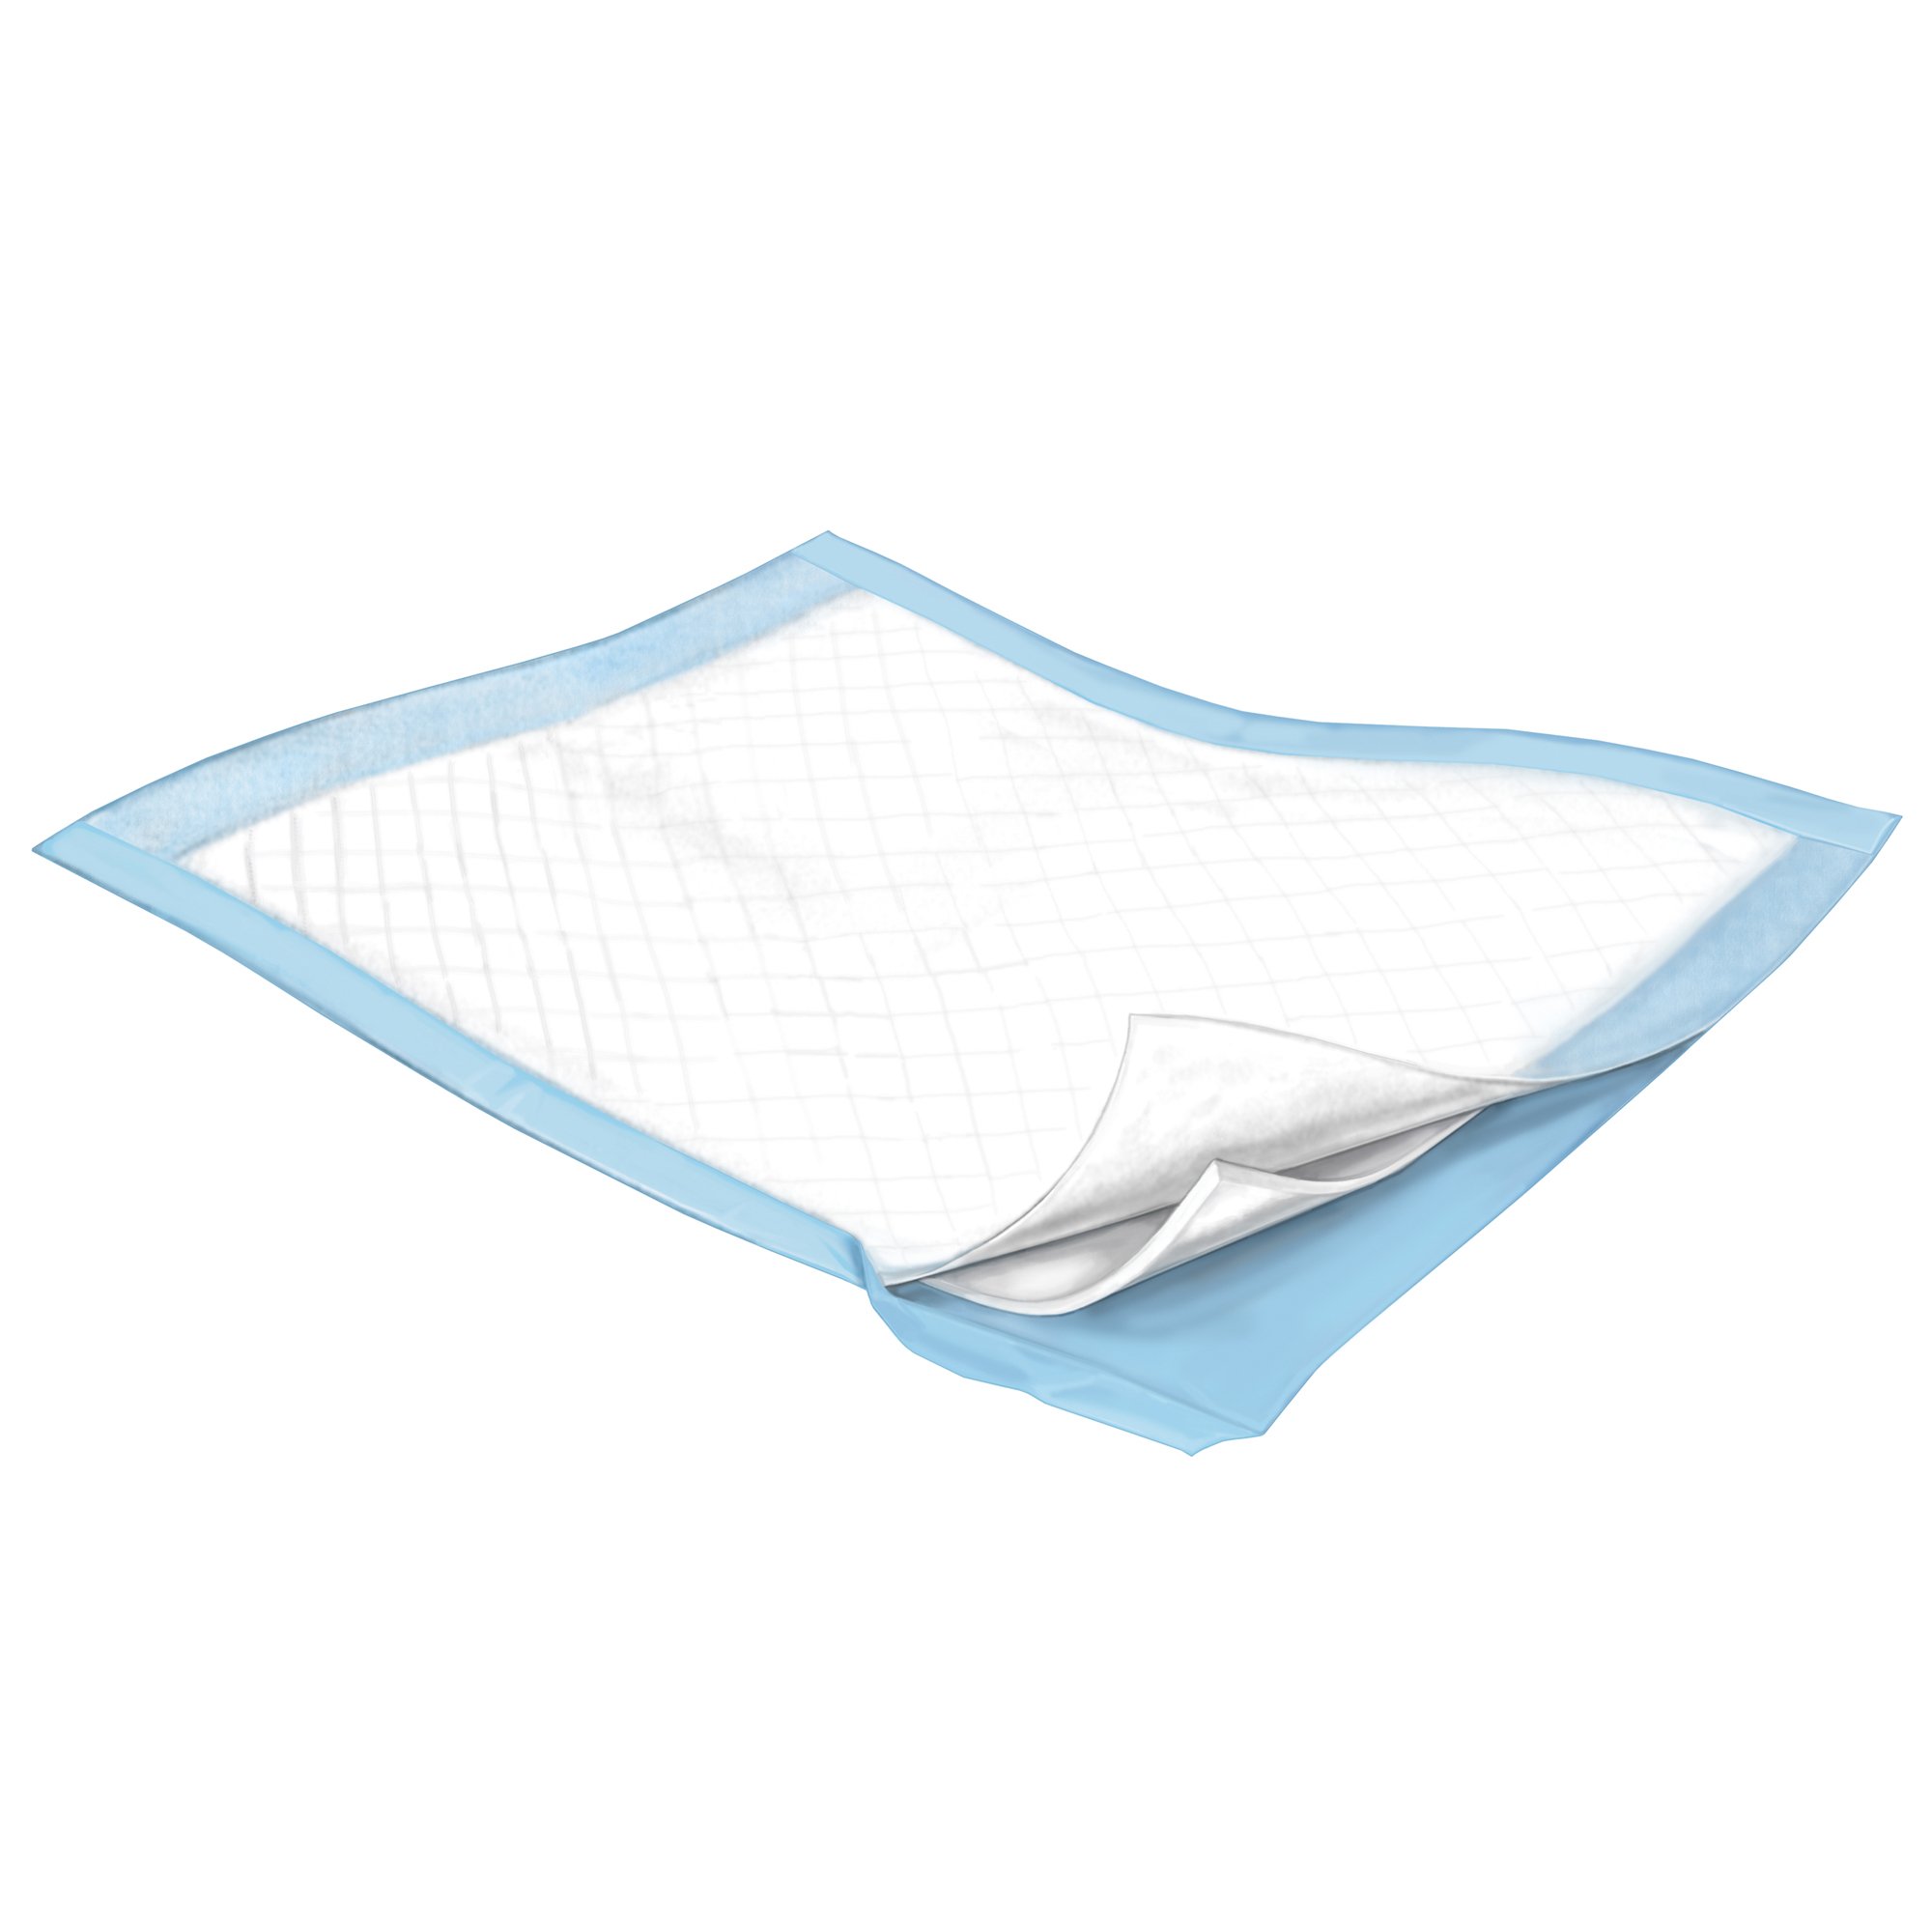 Simplicity Basic Light Absorbency Underpad, 17 x 24 Inch